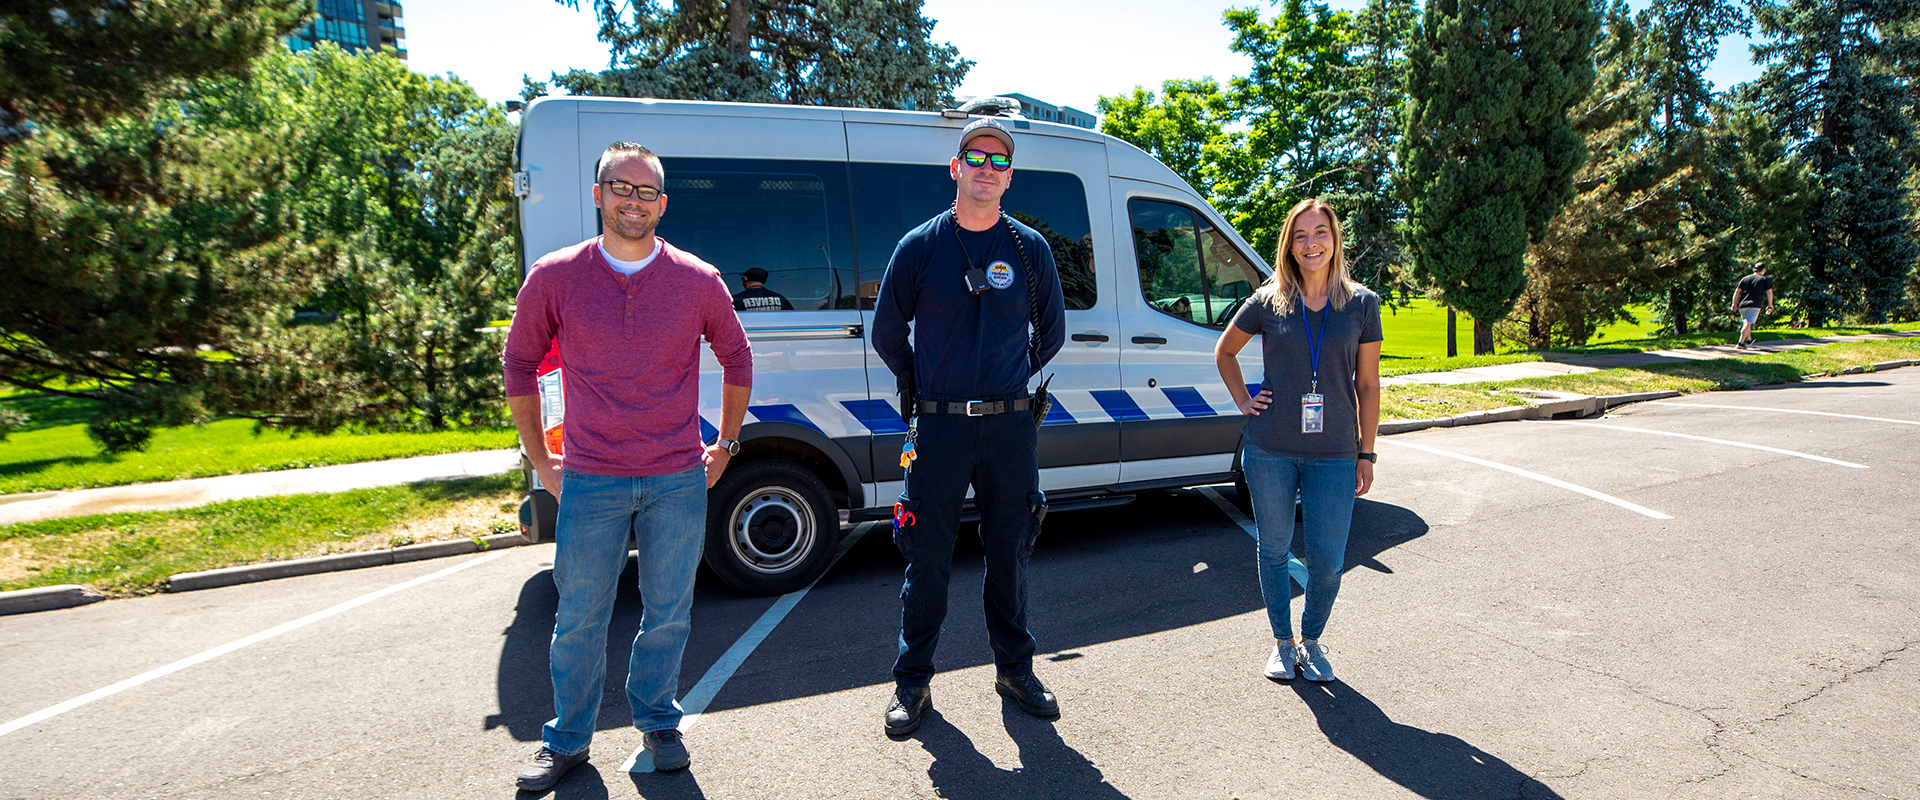 Photo illustrating the International Crisis Response Association's focus, three members of the Denver Crisis Response Team stand smiling in front of a mobile support van.